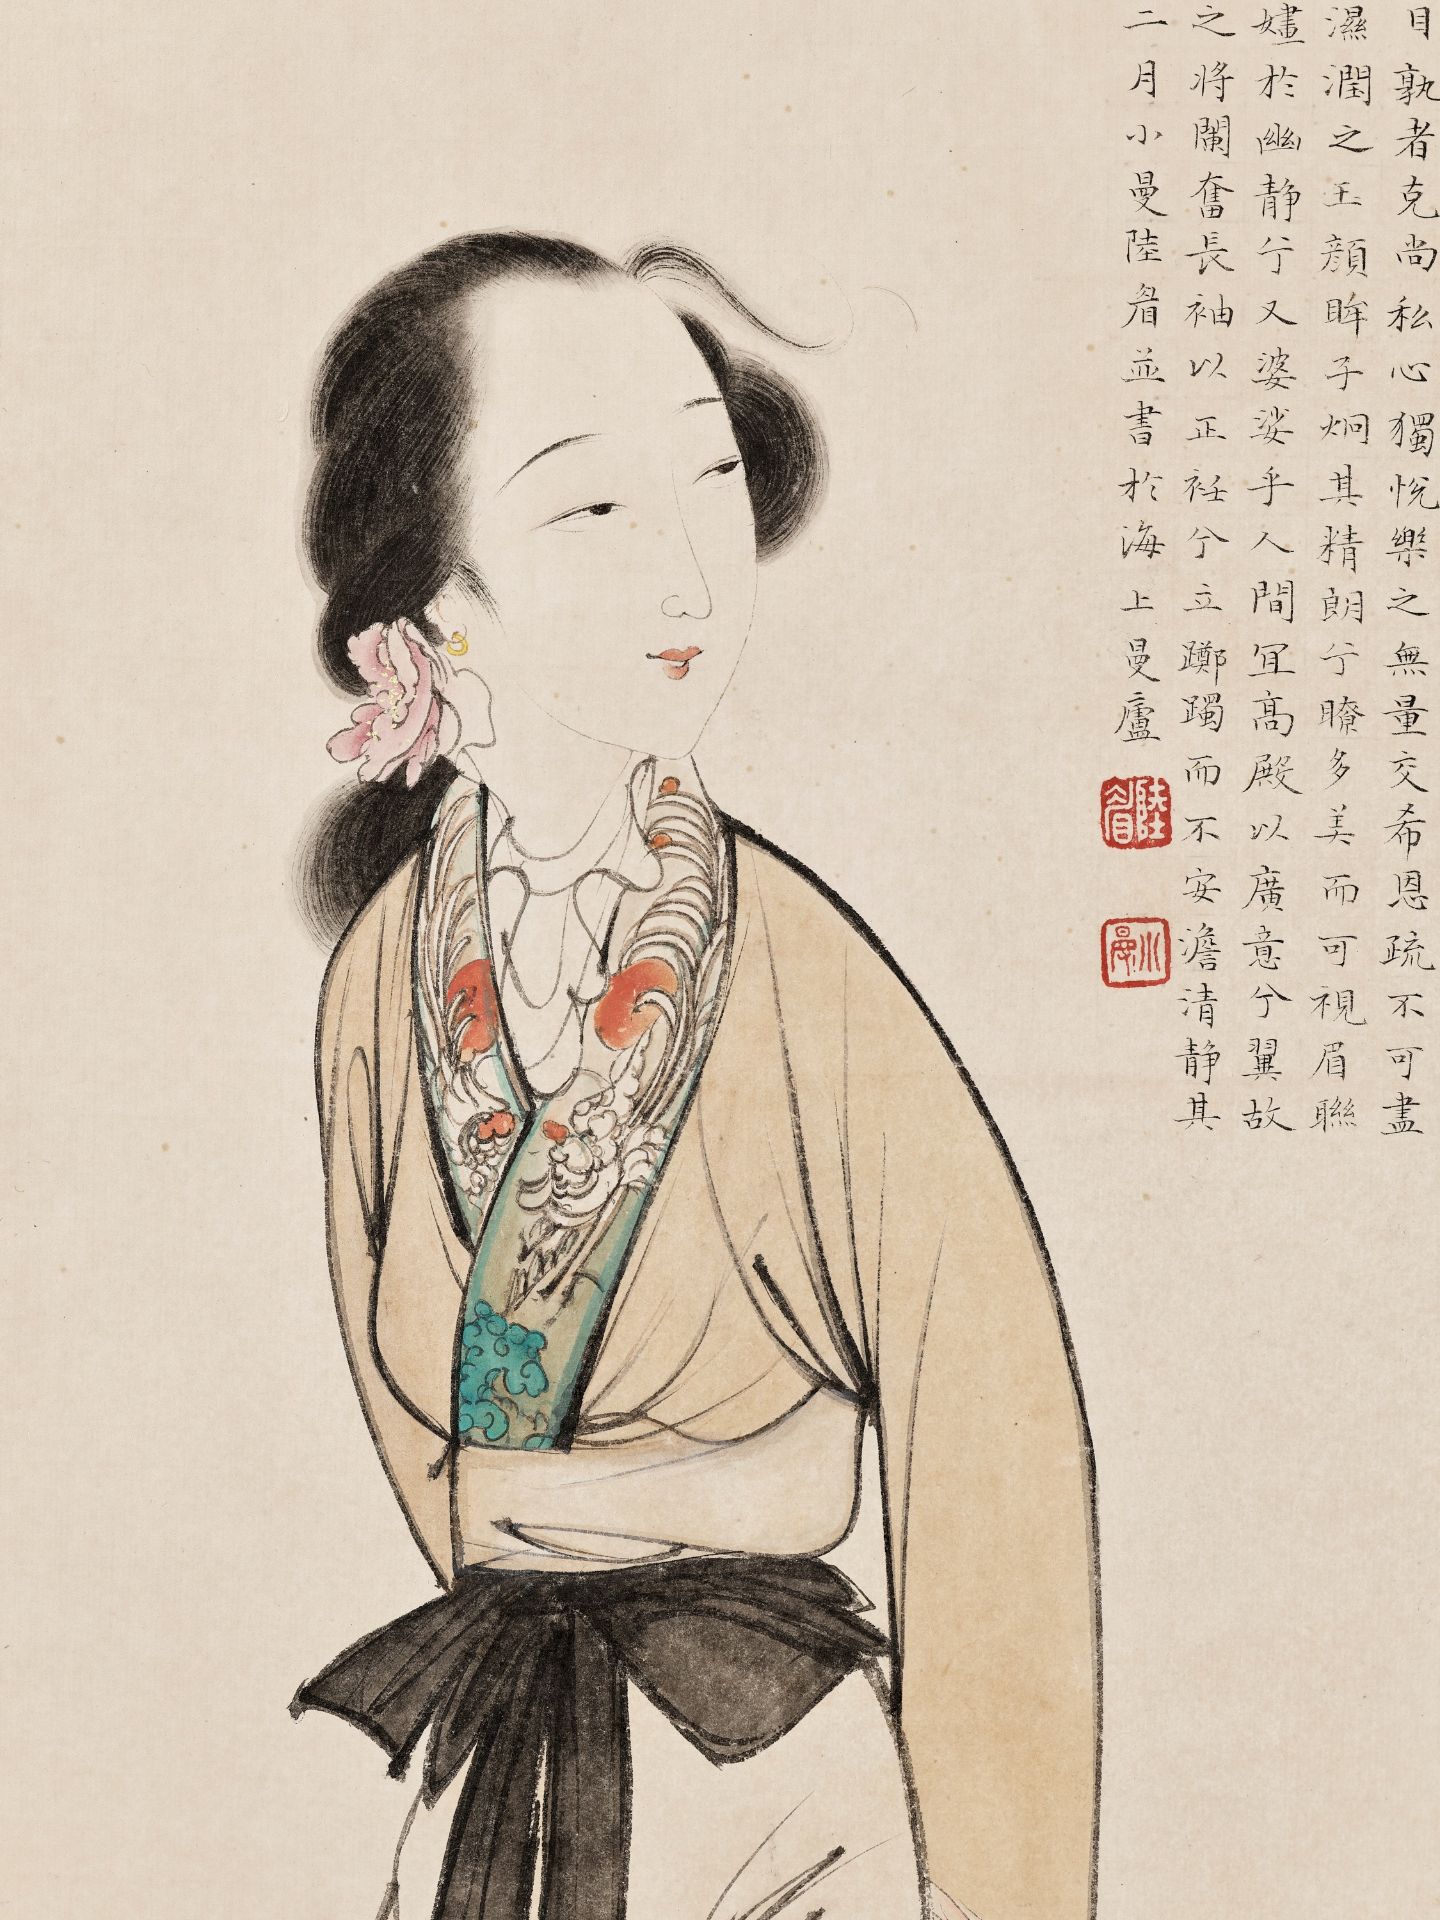 RHAPSODY ON THE GODDESS' BY LU XIAOMAN, DATED 1940 - Image 5 of 9